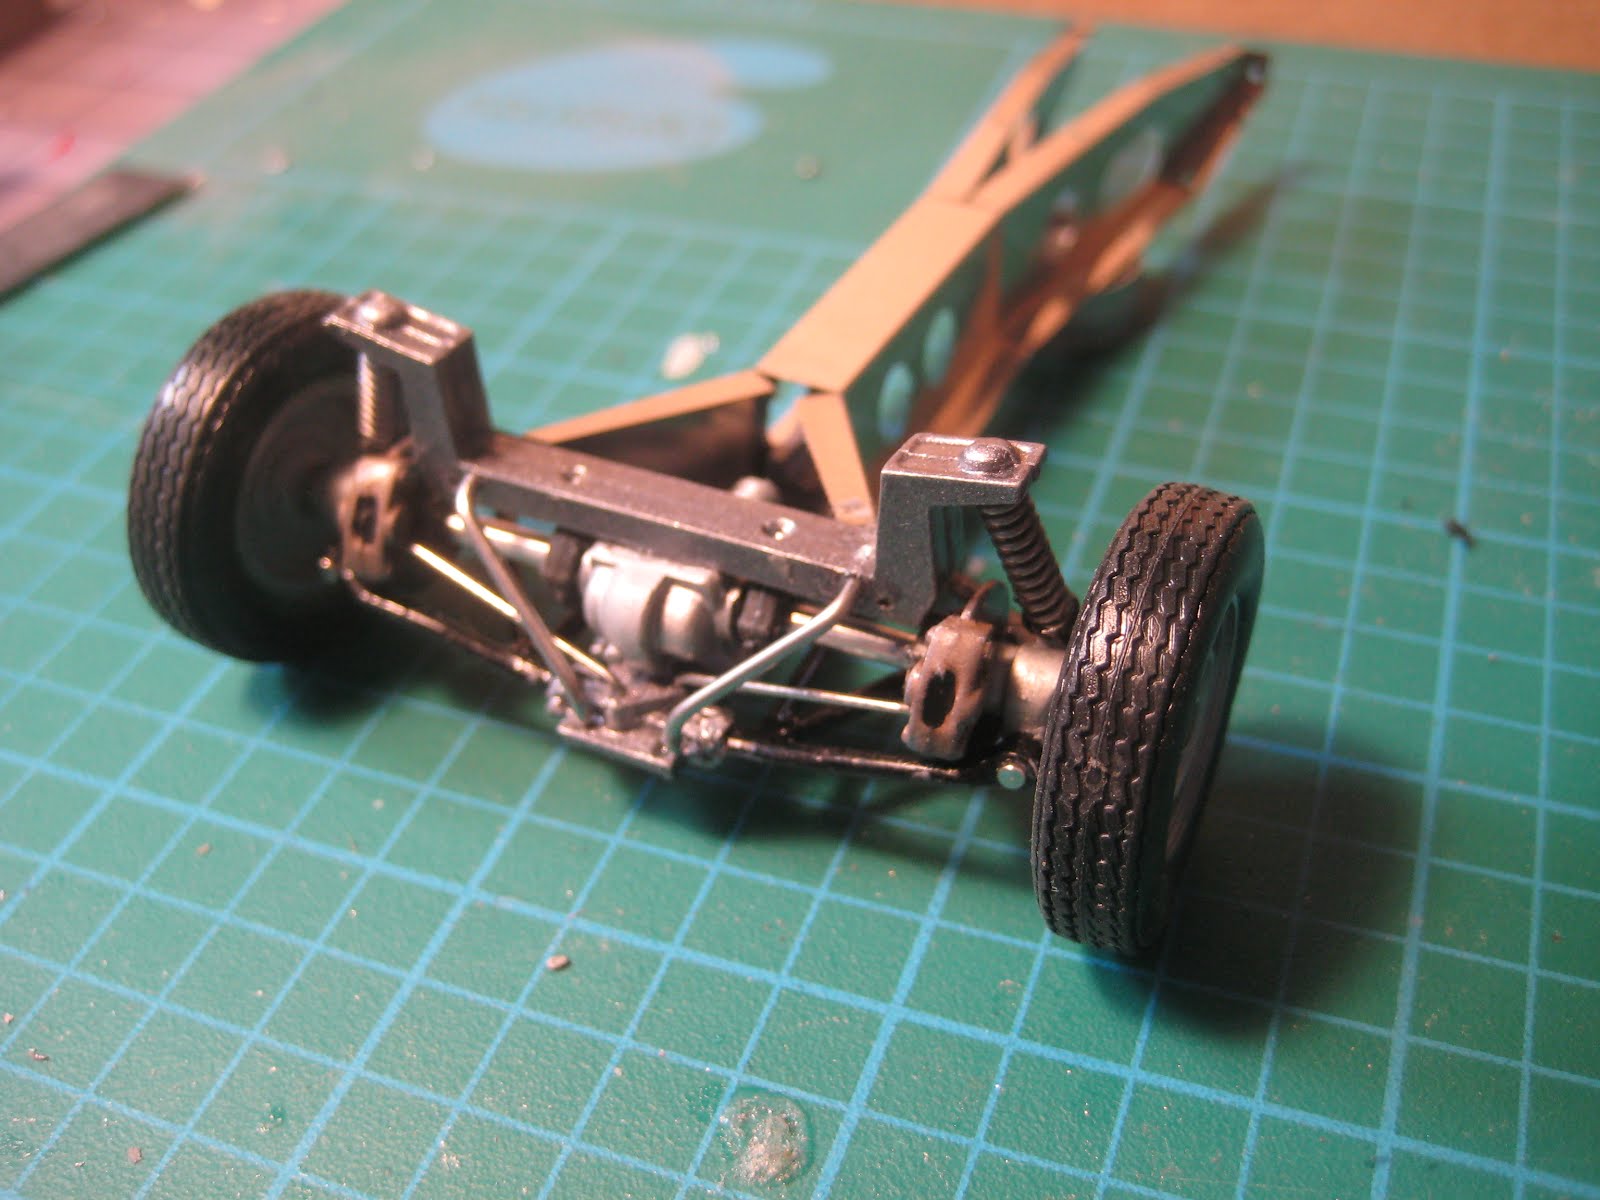 24th-scale: Lotus Elan S3: Chassis complete